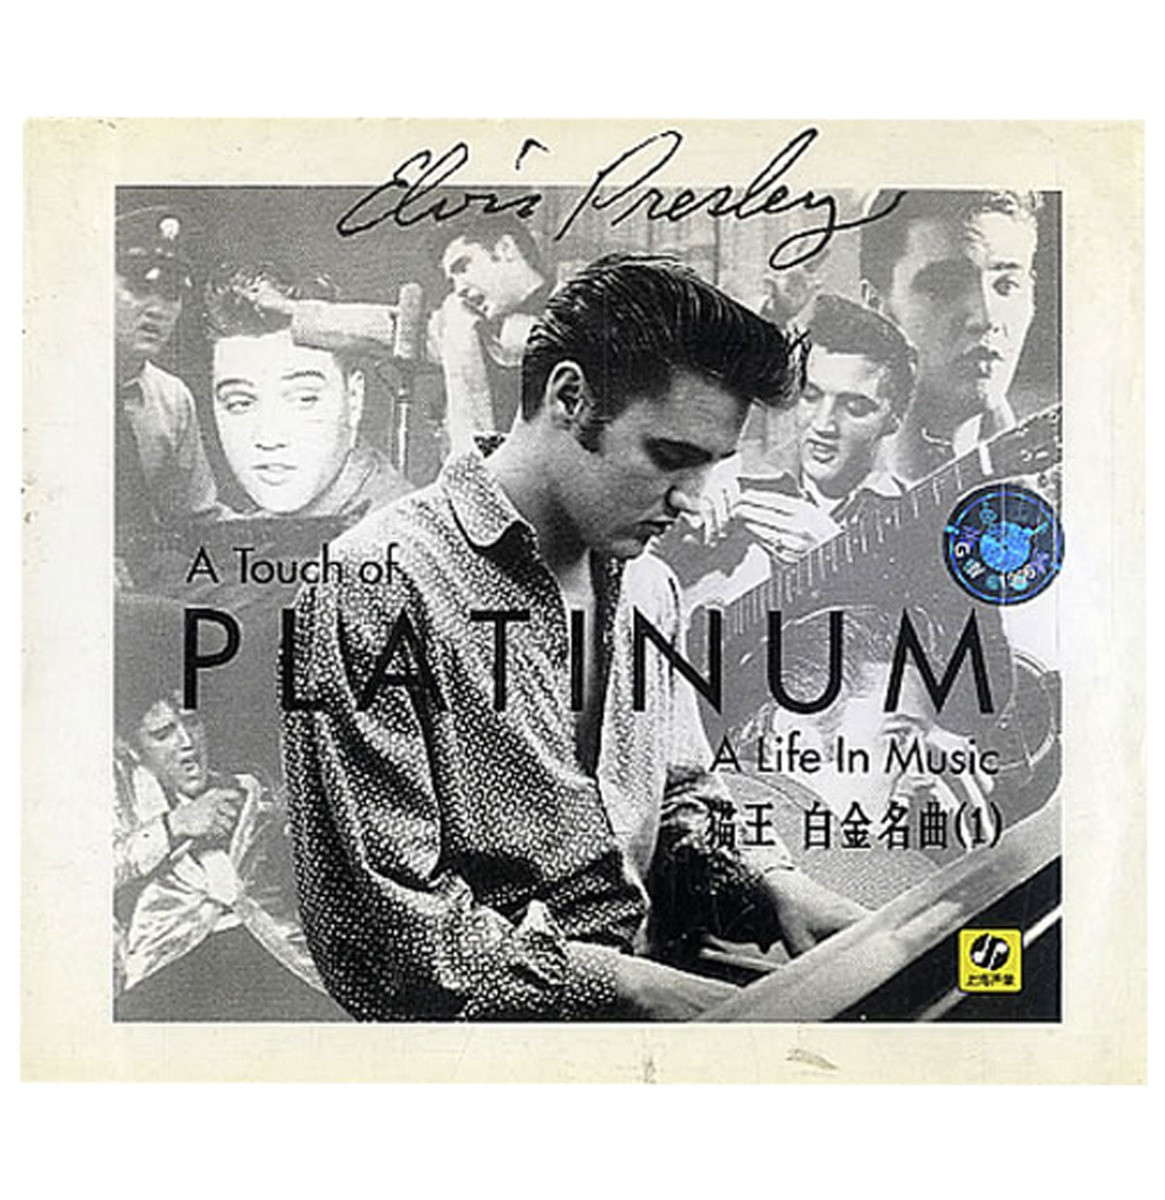 Elvis Presley: A Touch Of Platinum - A Life In Music CD - Shanghai Audio-Visual Press